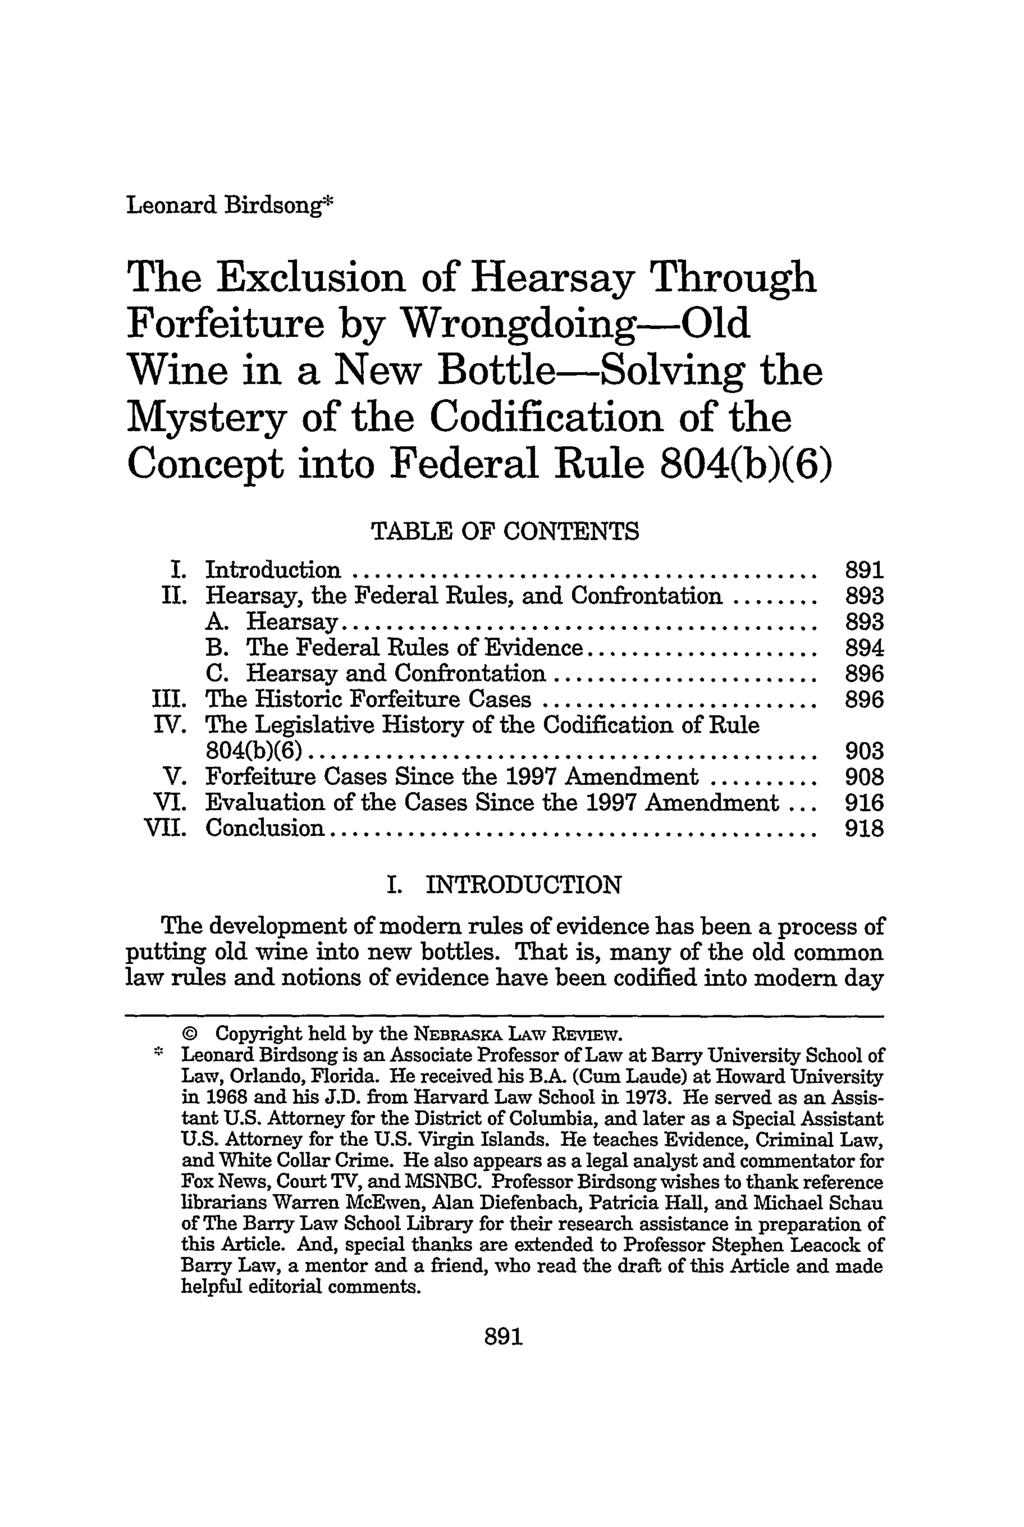 Leonard Birdsong* The Exclusion of Hearsay Through Forfeiture by Wrongdoing-Old Wine in a New Bottle-Solving the Mystery of the Codification of the Concept into Federal Rule 804(b)(6) TABLE OF